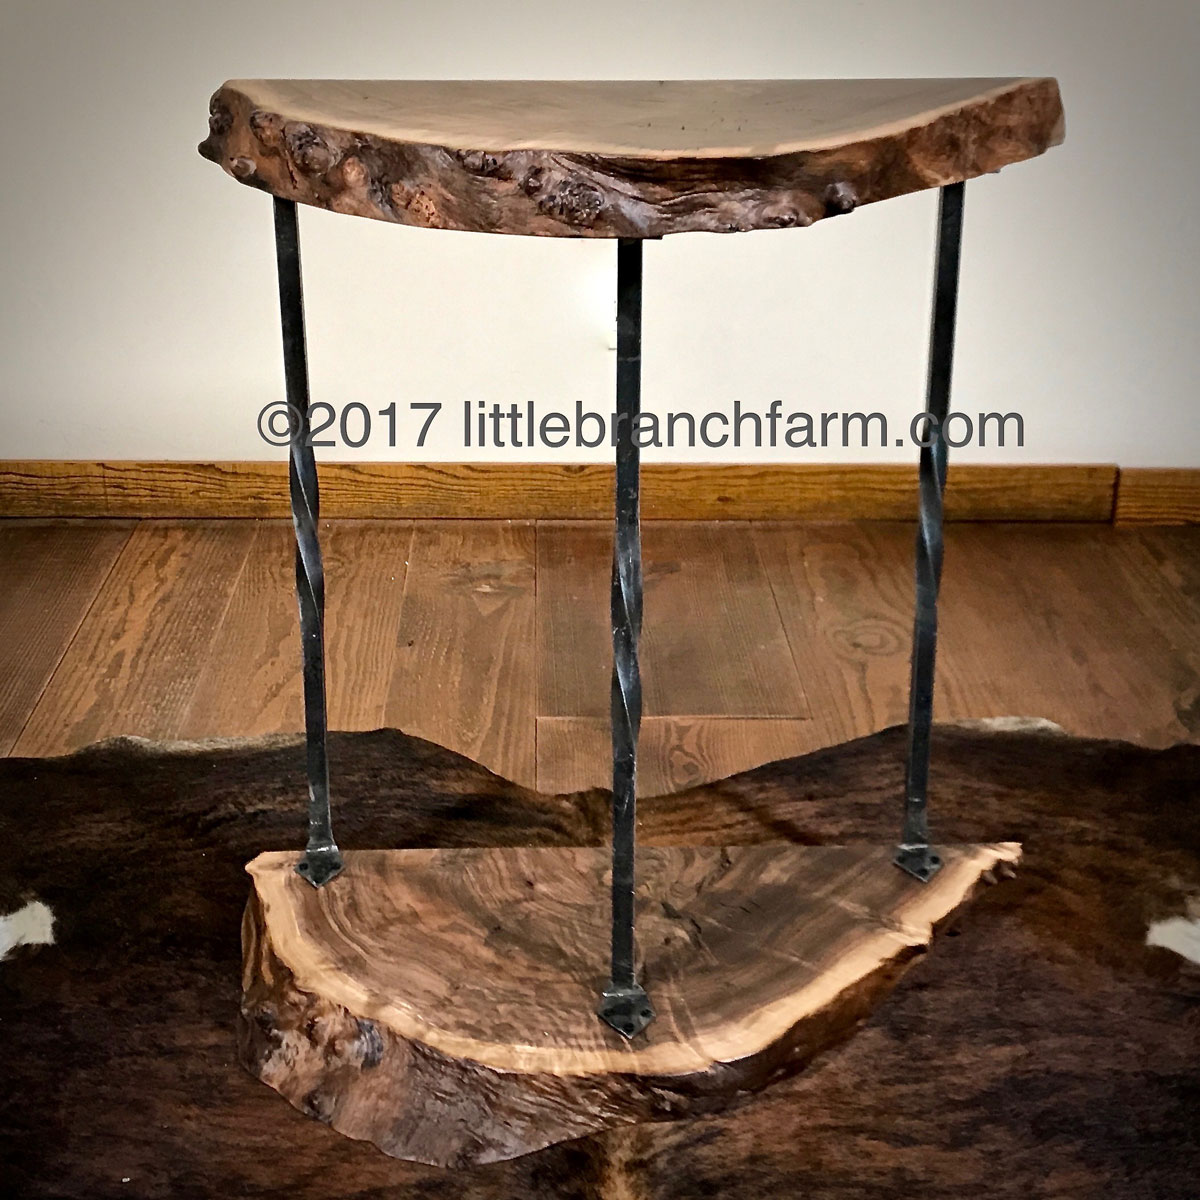 live edge wood accent table littlebranch farm slab round concrete homemade runners furry chair target black and white cherry furniture bulk tablecloths for weddings inch decorator